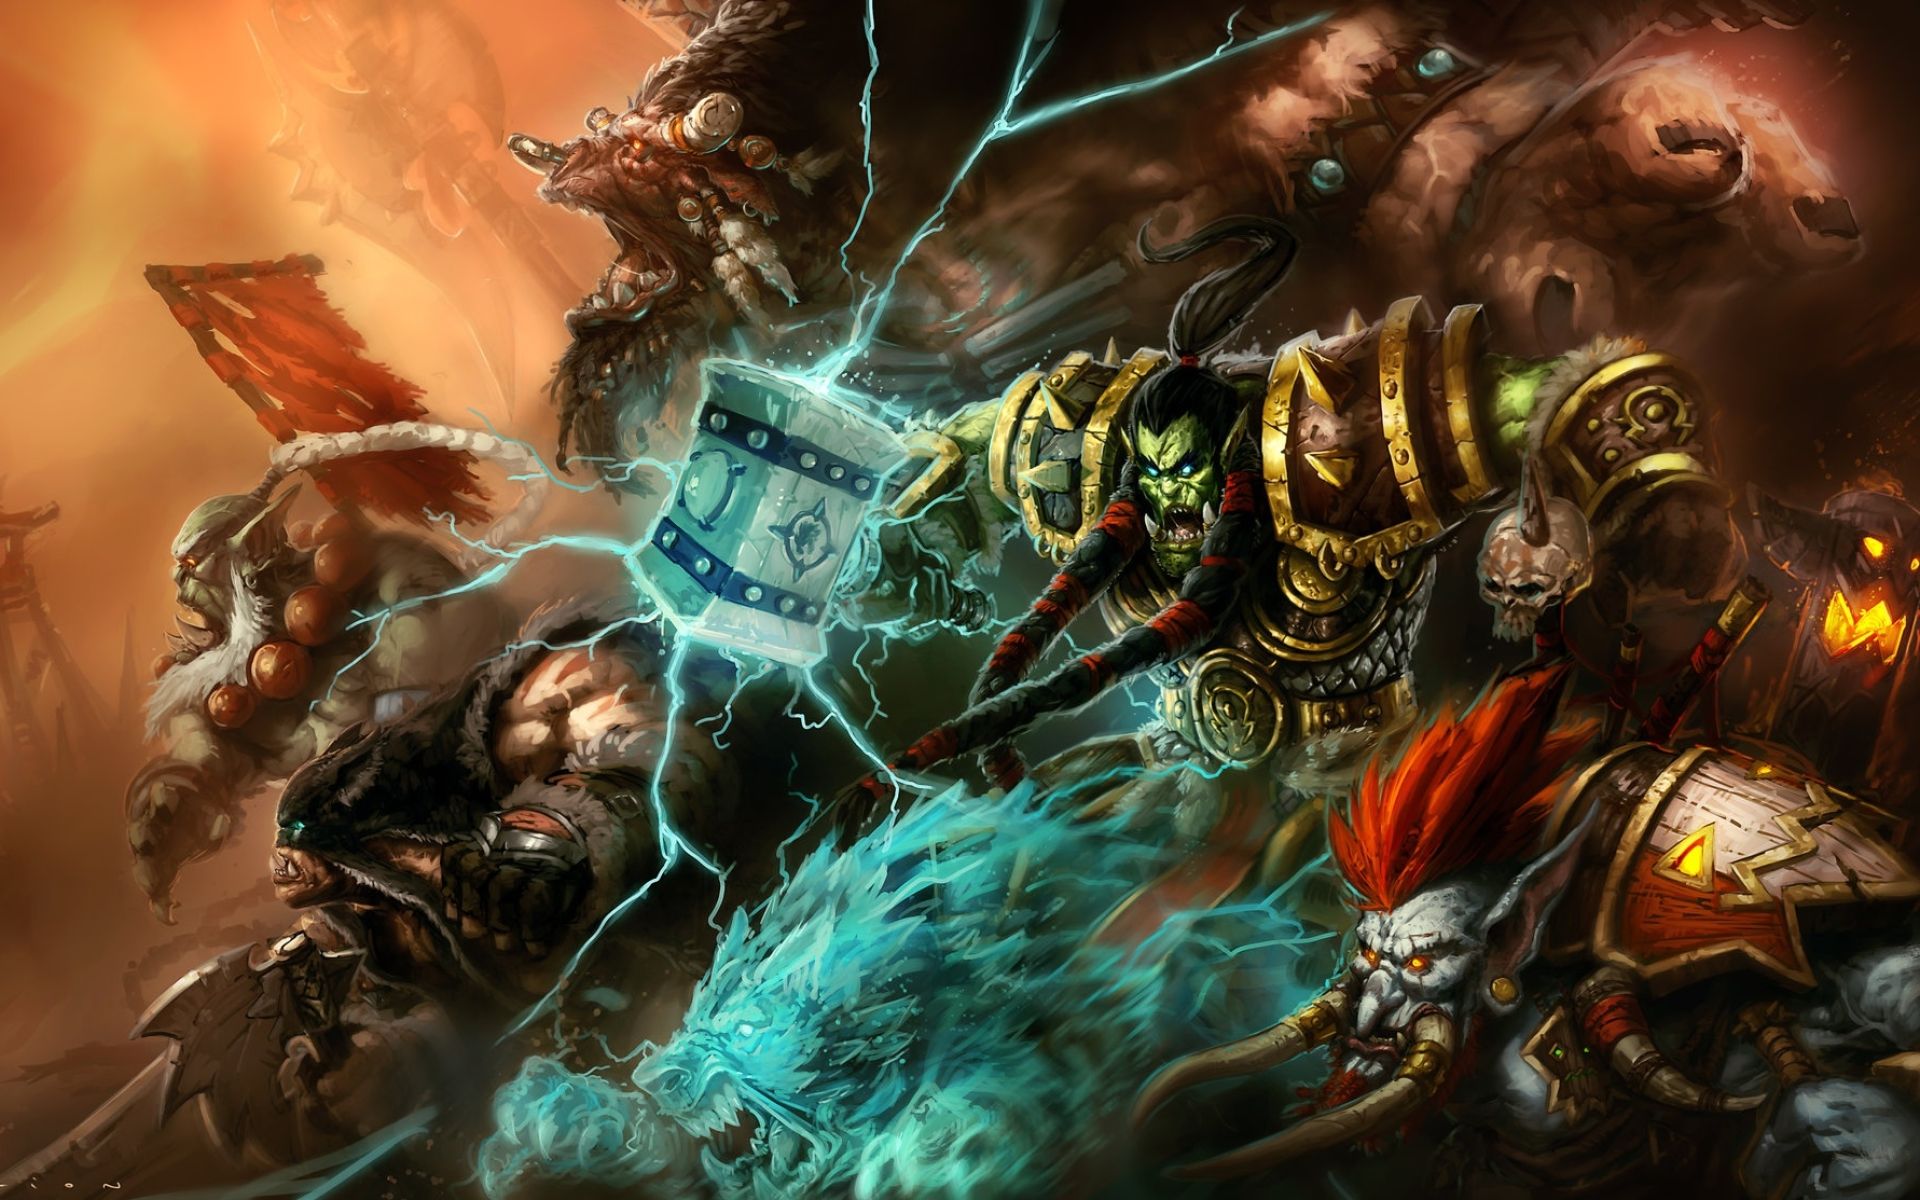 Download wallpaper Thrall, Rexxar, battle, WoW characters, monsters, World of Warcraft, artwork, WoW for desktop with resolution 1920x1200. High Quality HD picture wallpaper